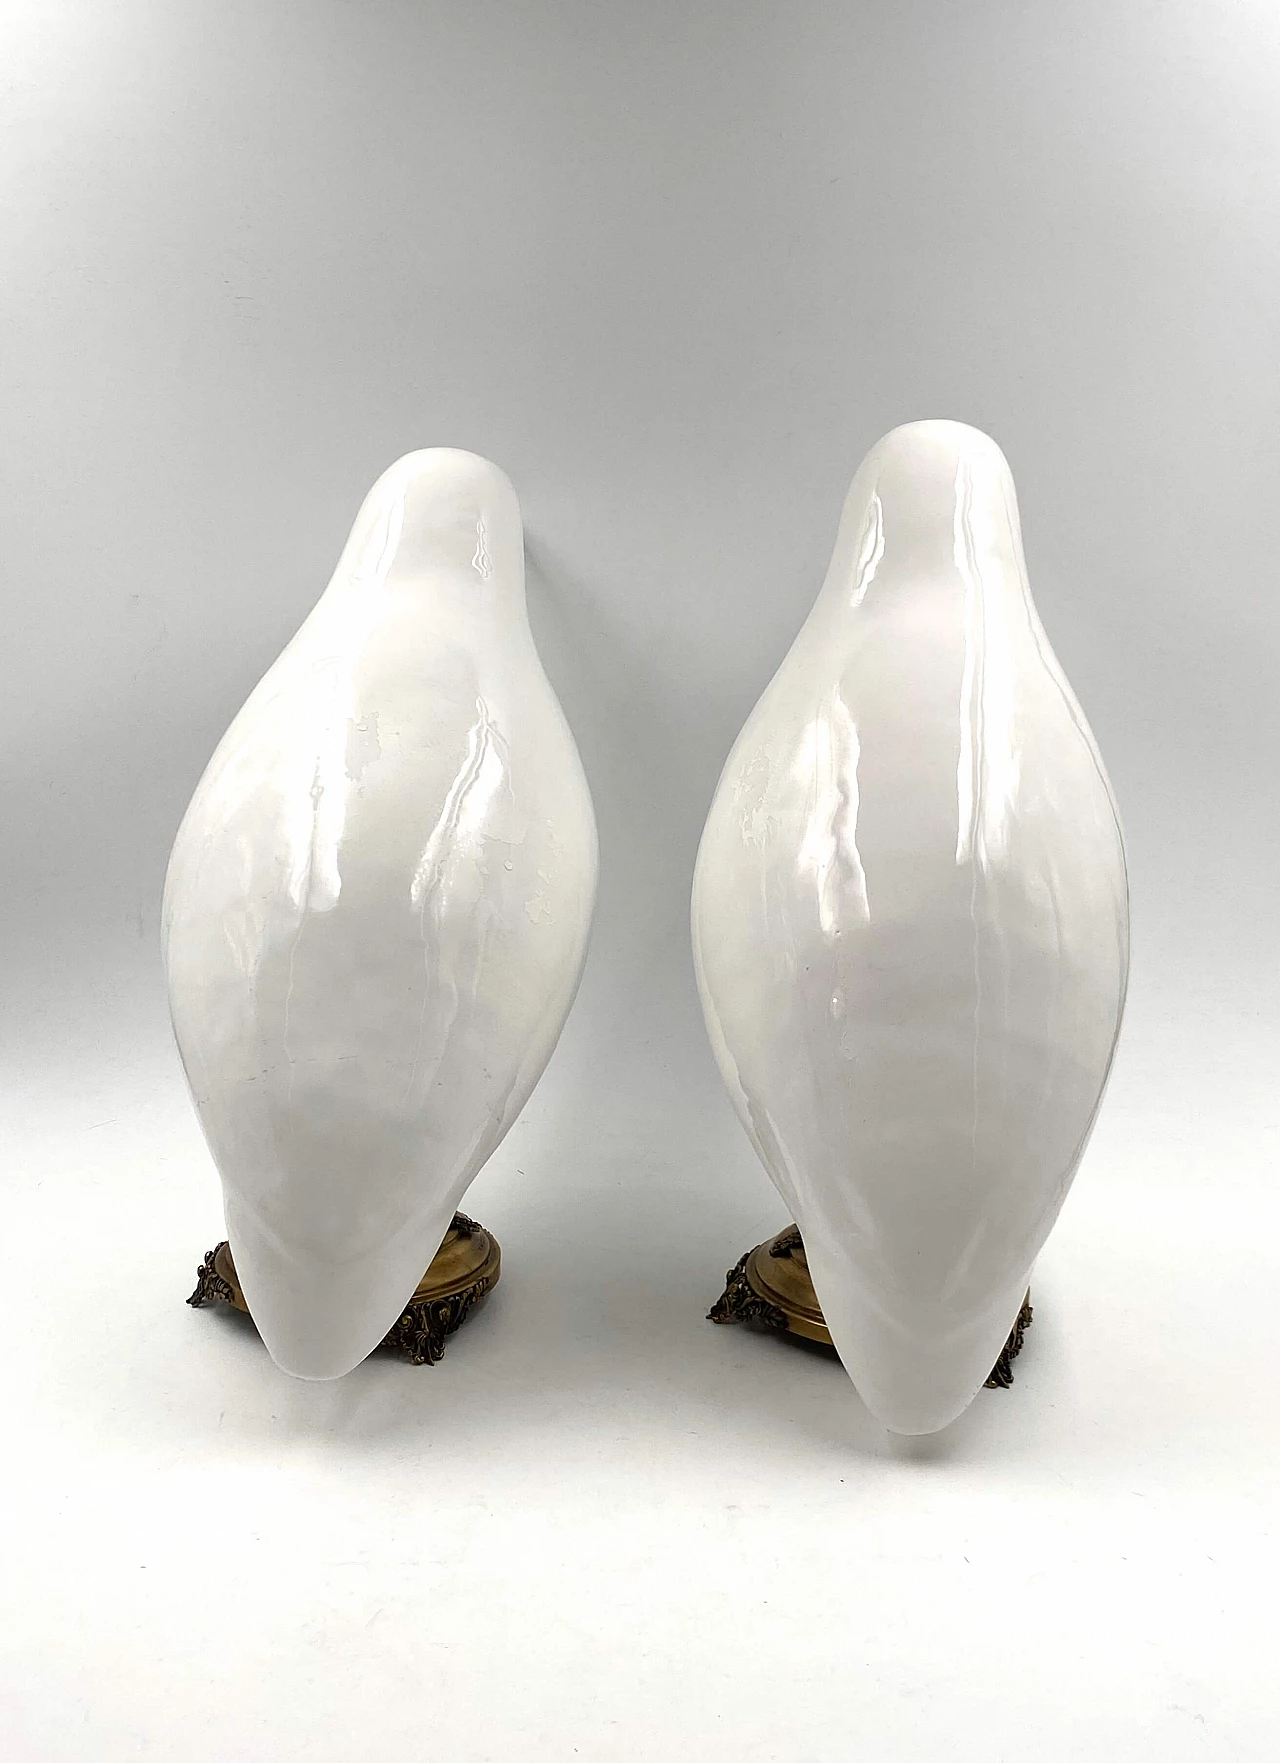 Pair of large ceramic and brass bird sculptures, early 20th century 1330608